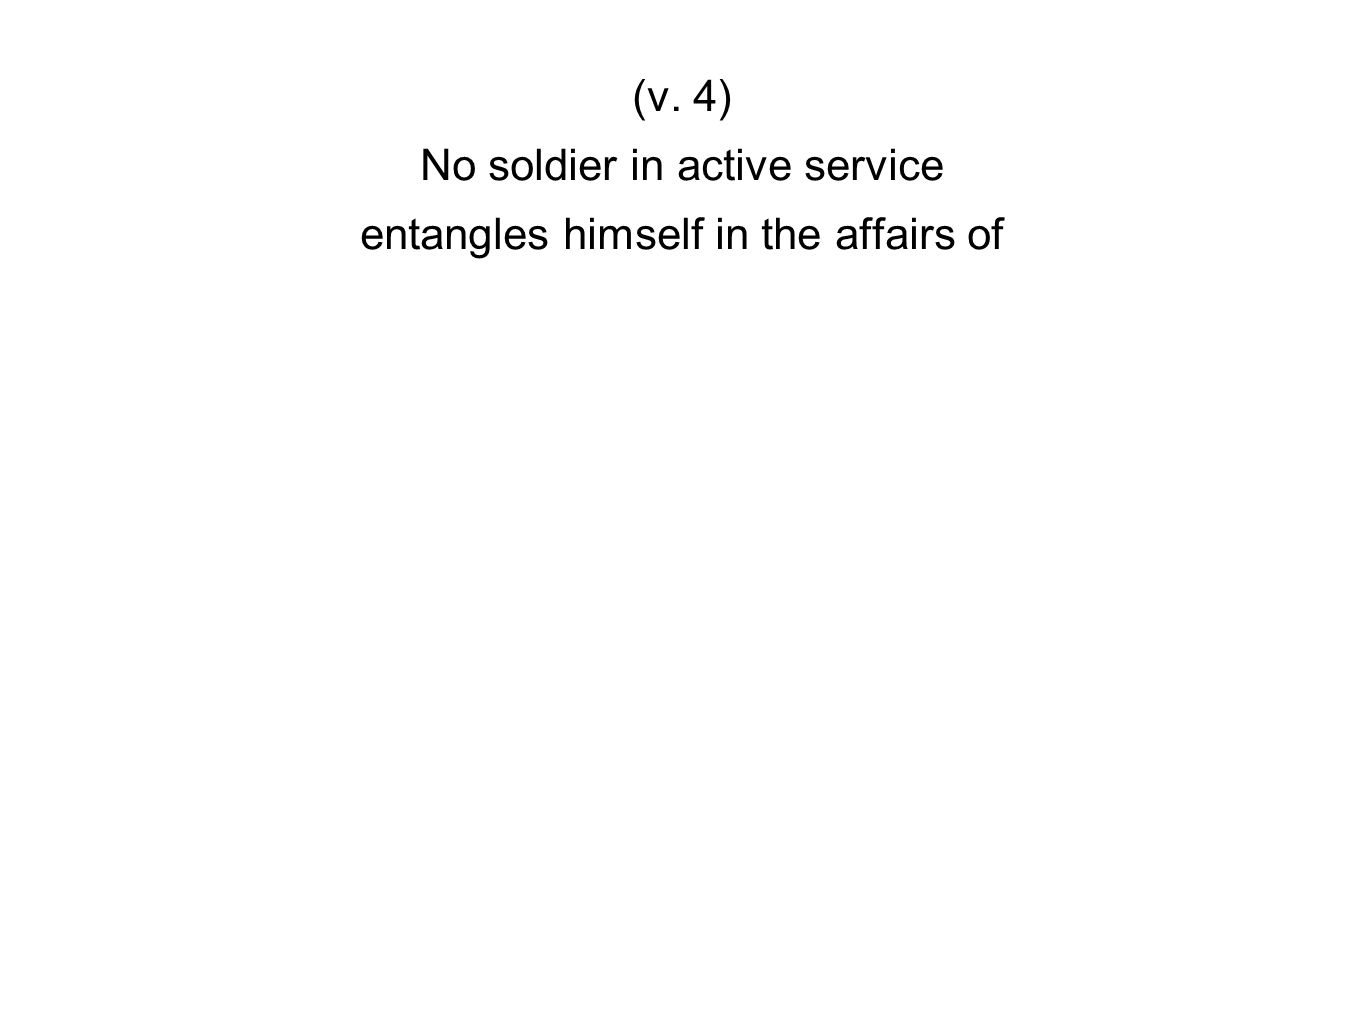 (v. 4) No soldier in active service entangles himself in the affairs of